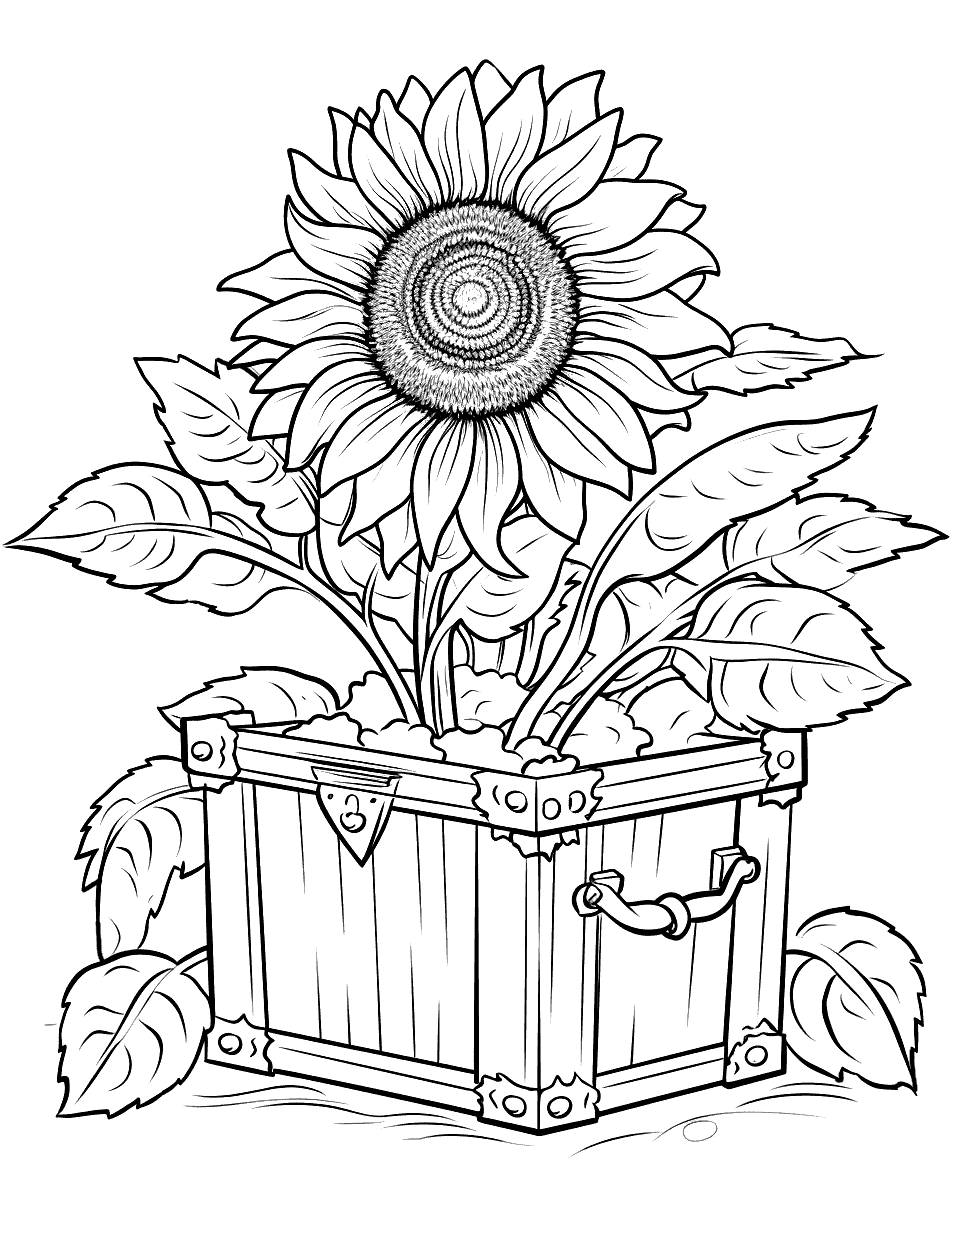 Treasure Chest Sunflower Coloring Page - A sunflower in a small treasure chest.